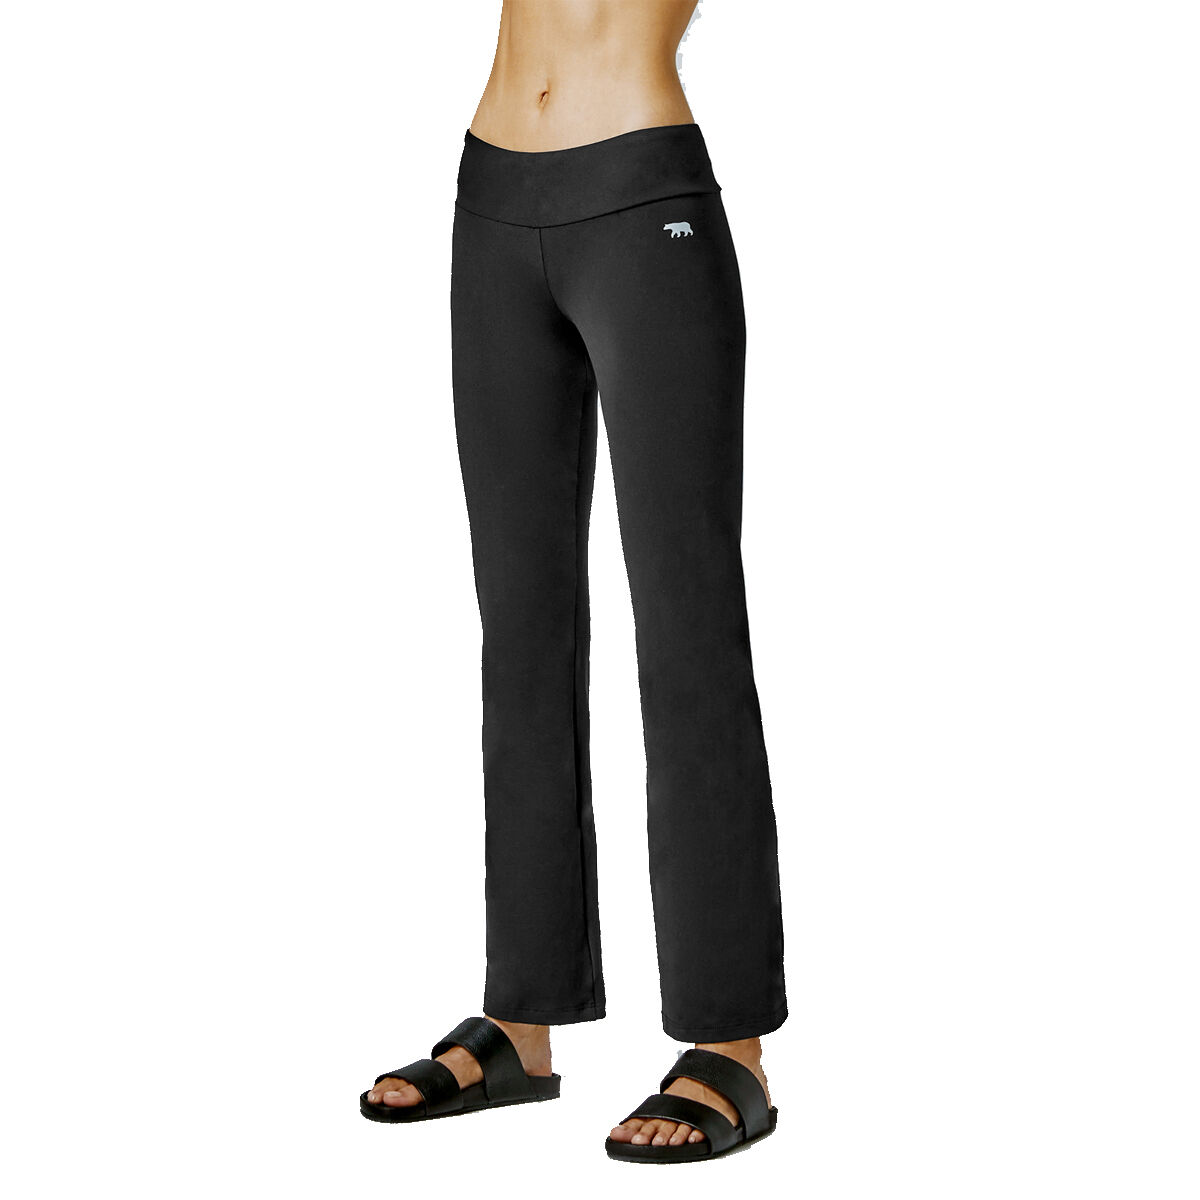 Wilsons Athletic Pants Womens Small Petite